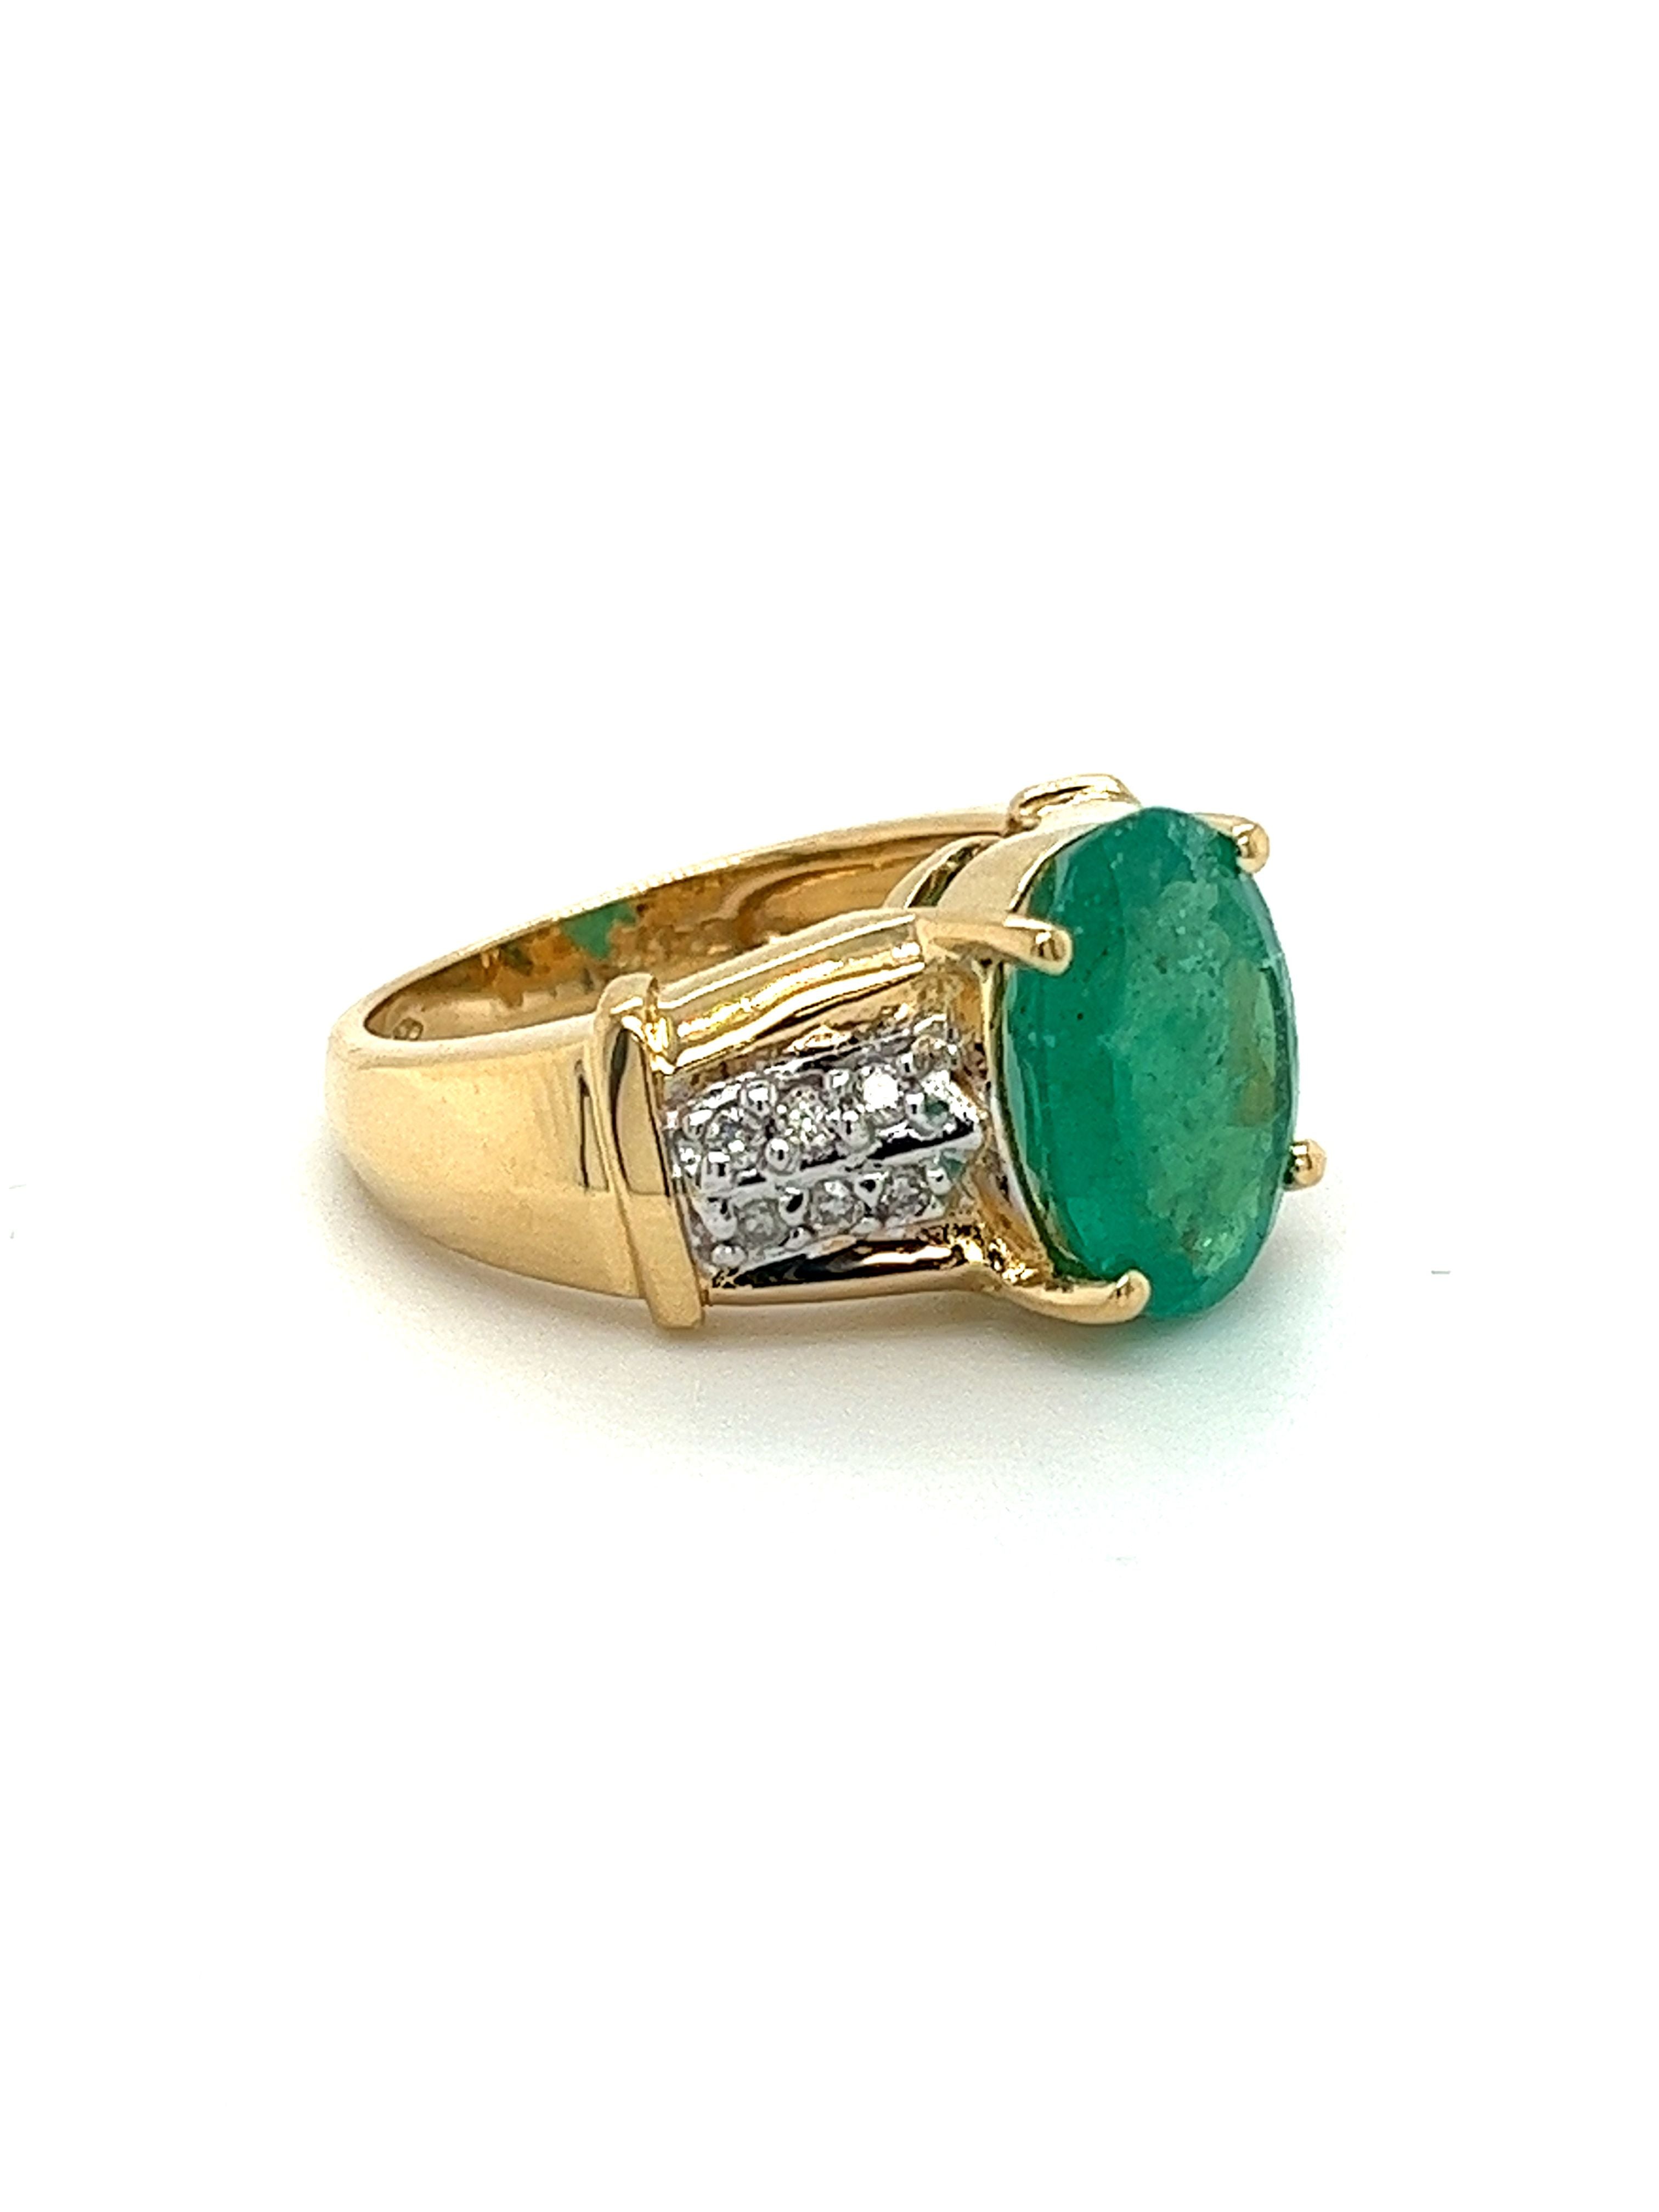 4_14-Carat-Oval-Cut-Natural-Emerald-and-Diamond-Ring-in-18K-Yellow-Gold-Rings-2.jpg